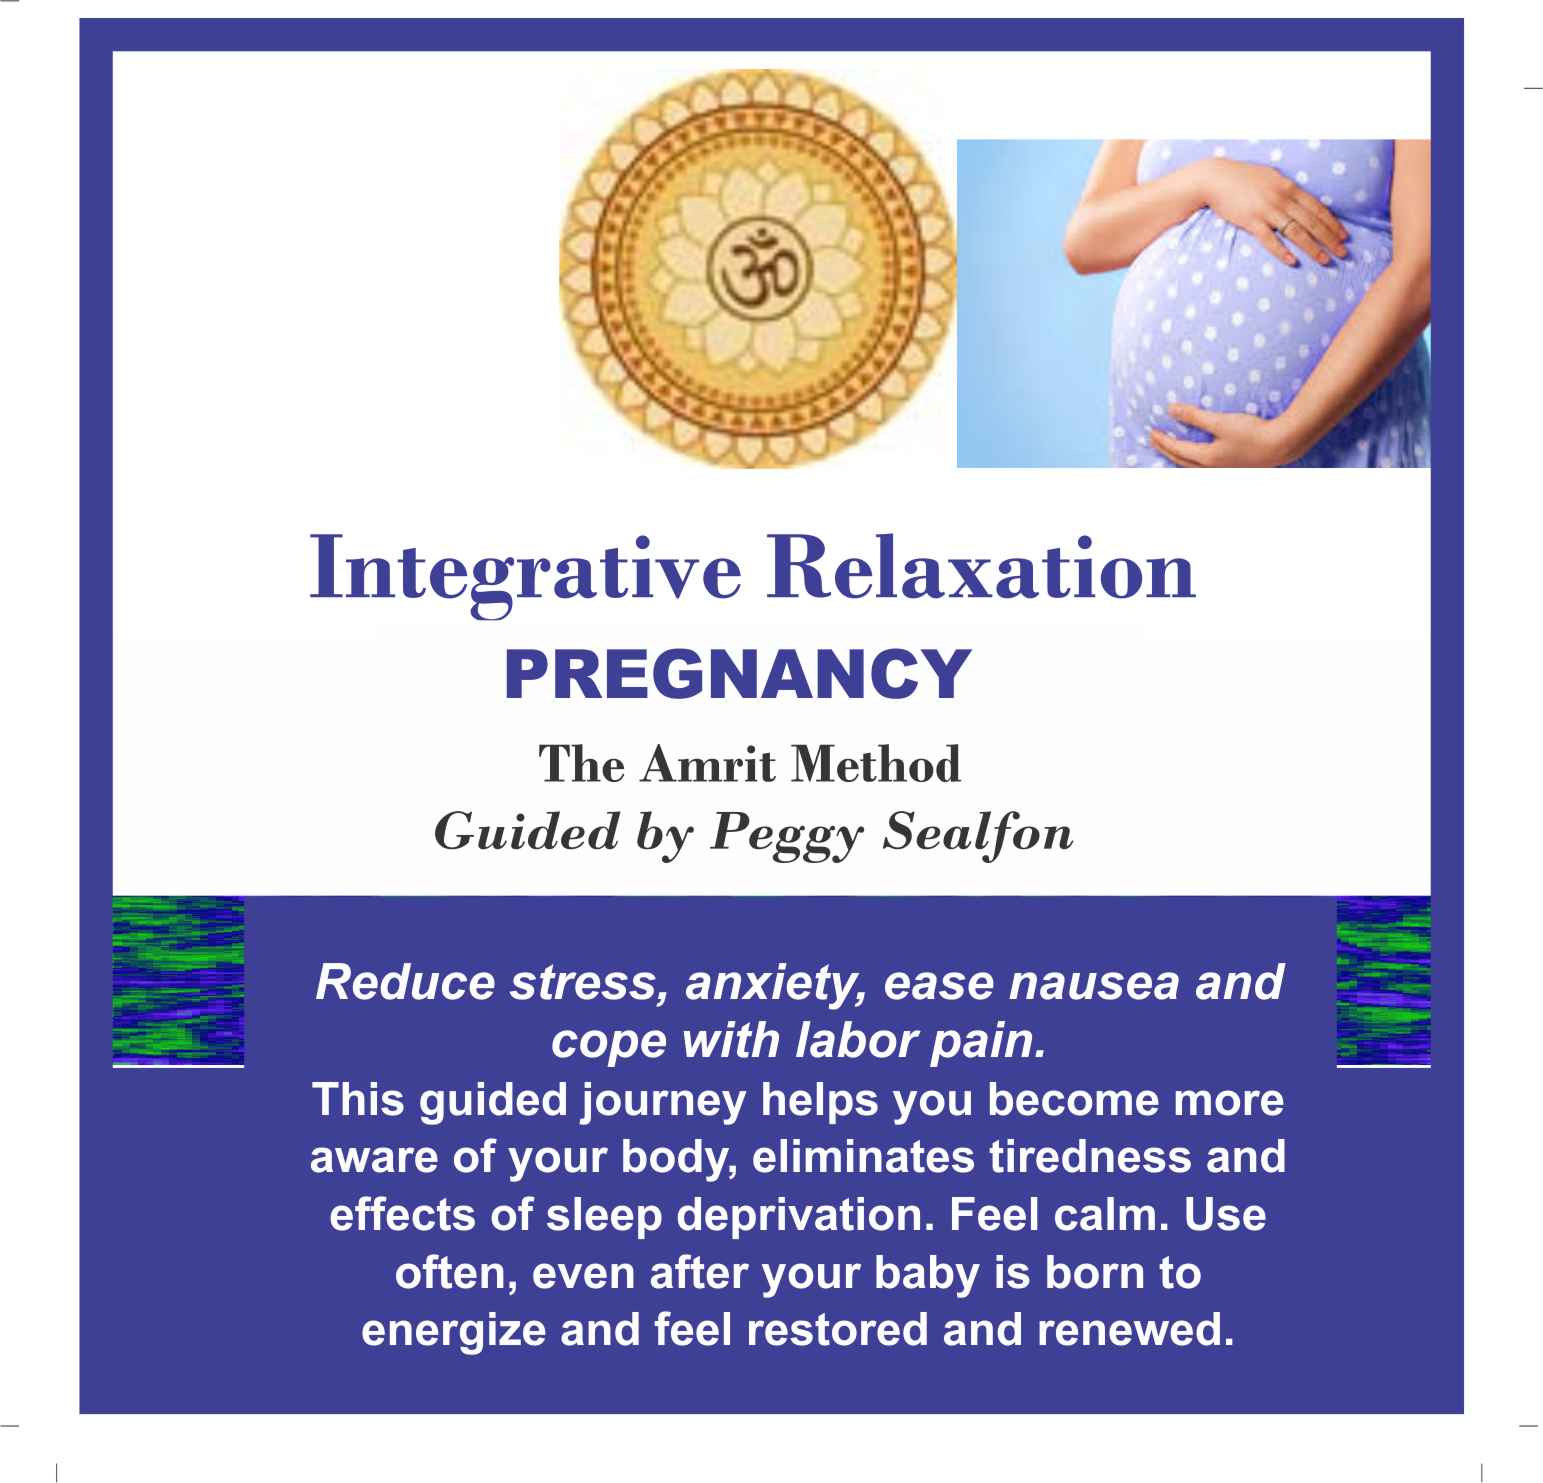 Integrative Relaxation for Pregnancy